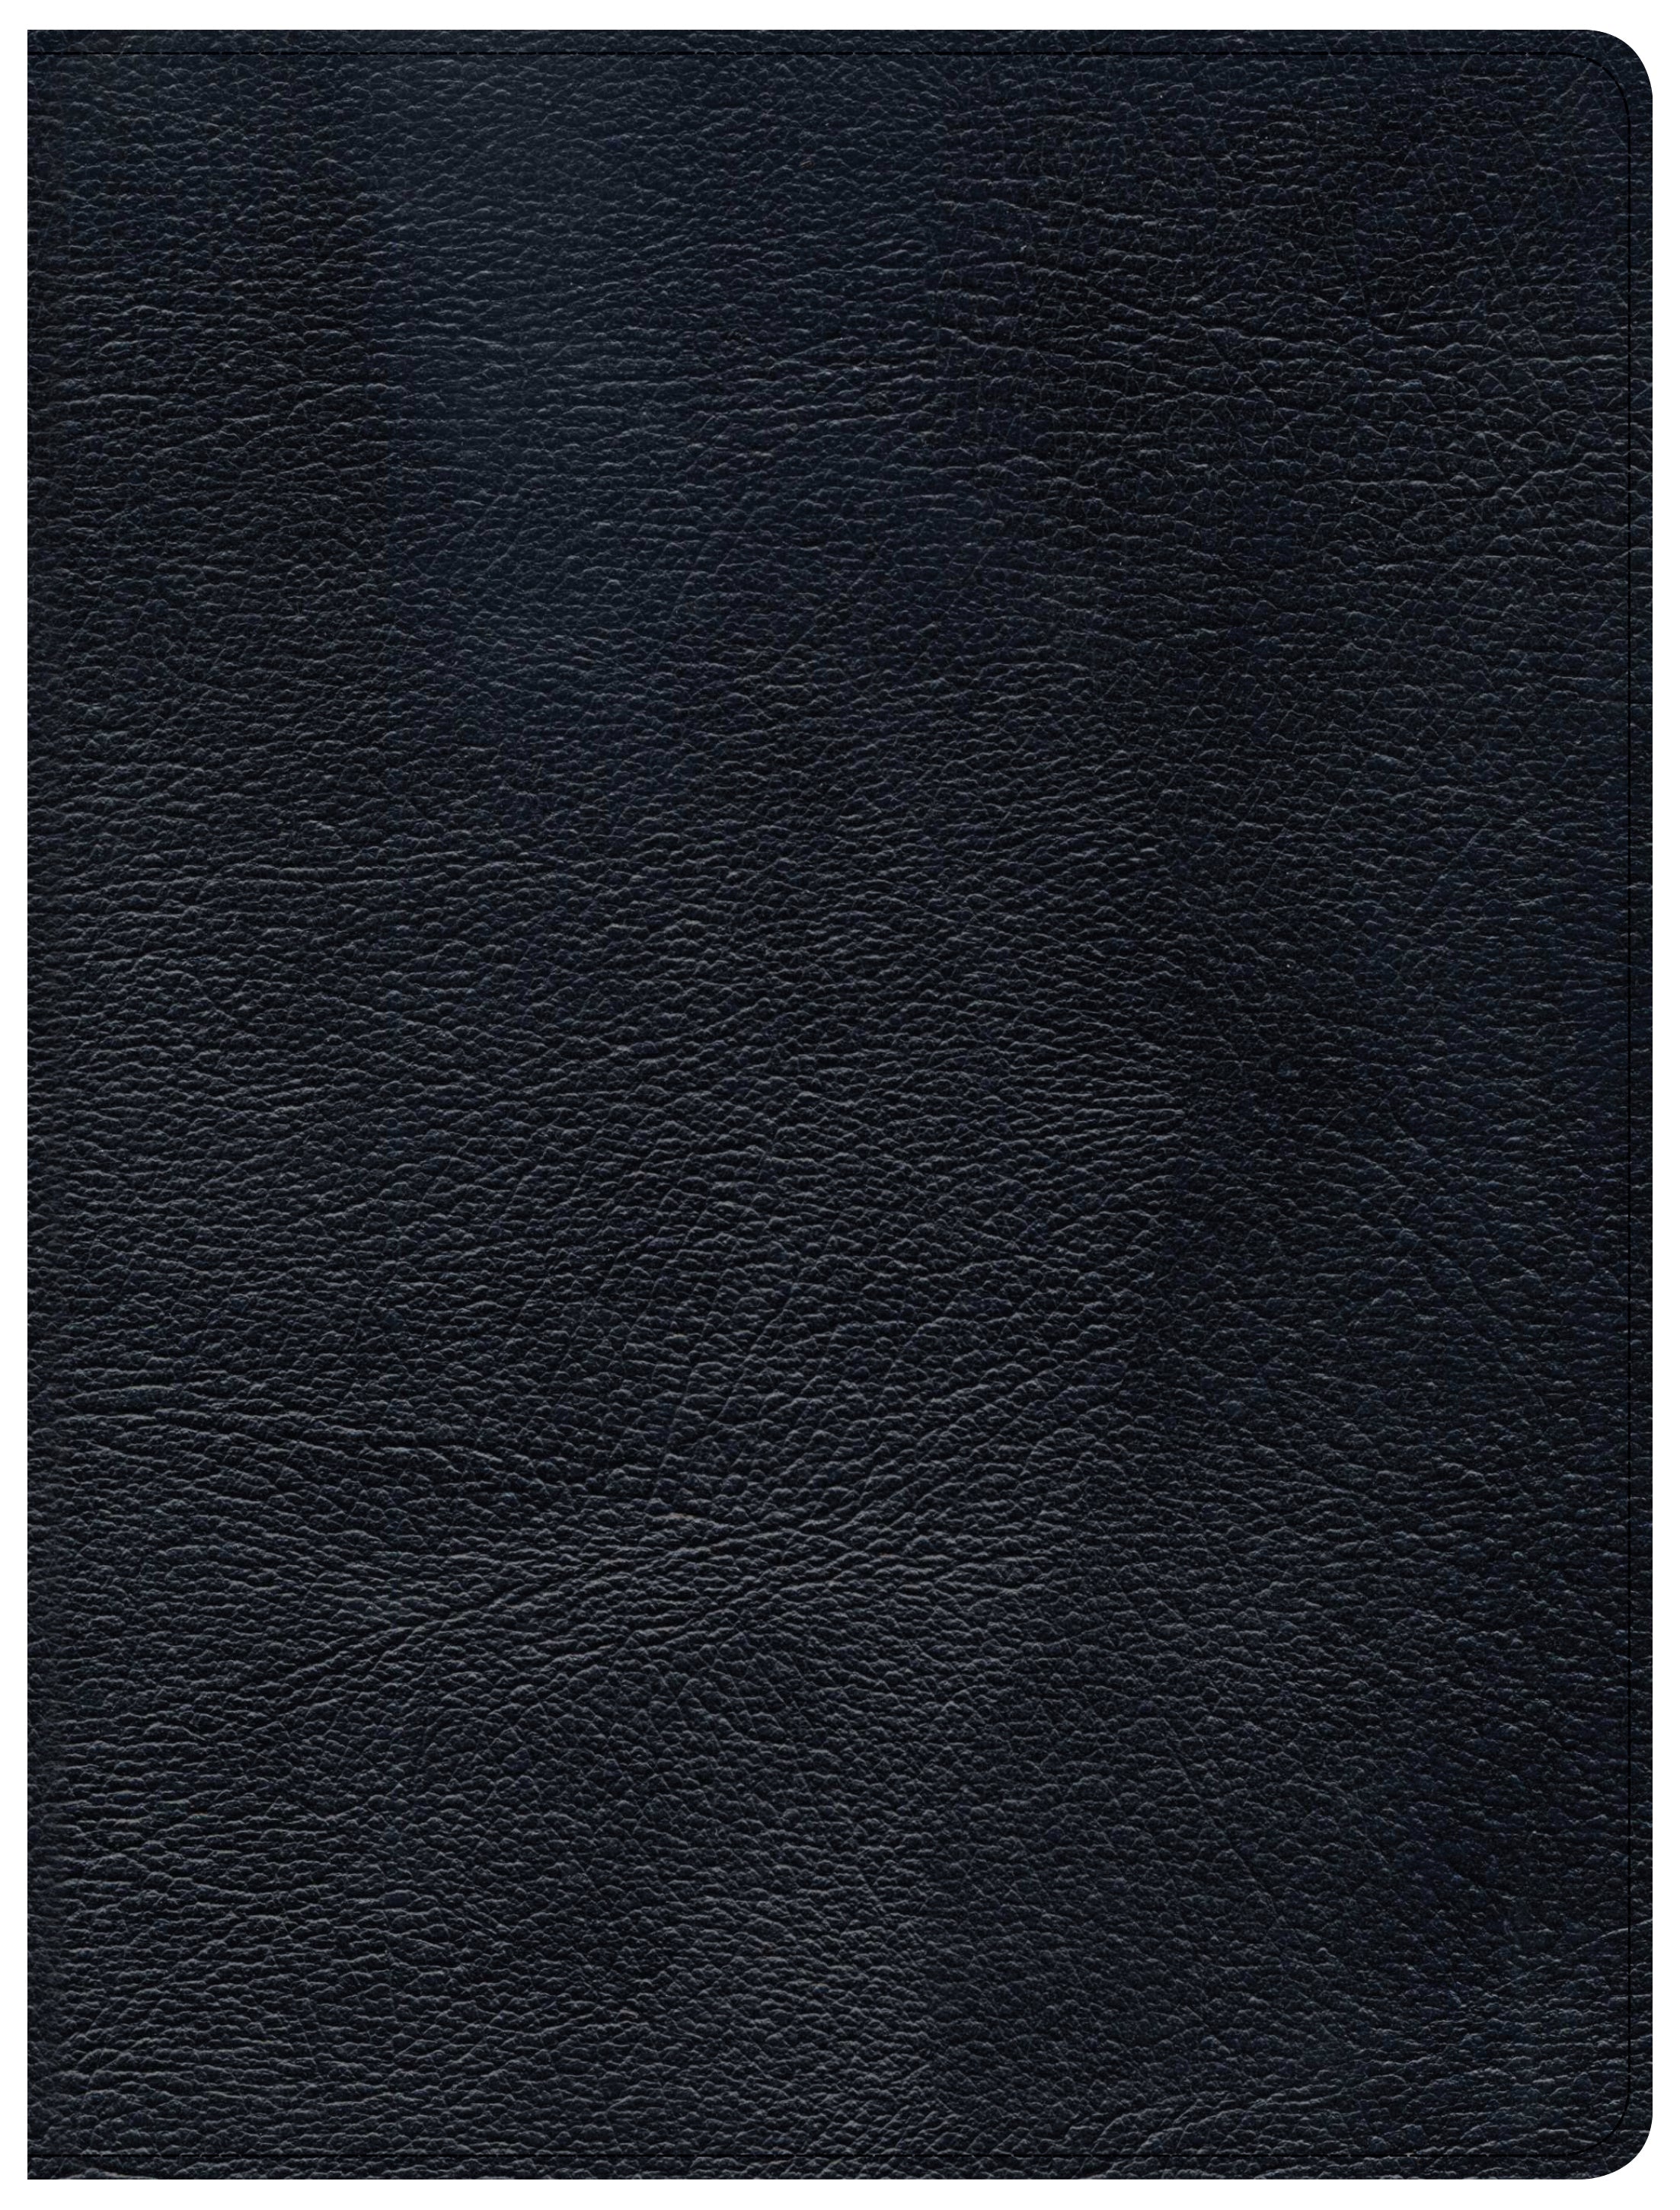 Image of CSB Tony Evans Study Bible, Black Genuine Leather, Indexed other